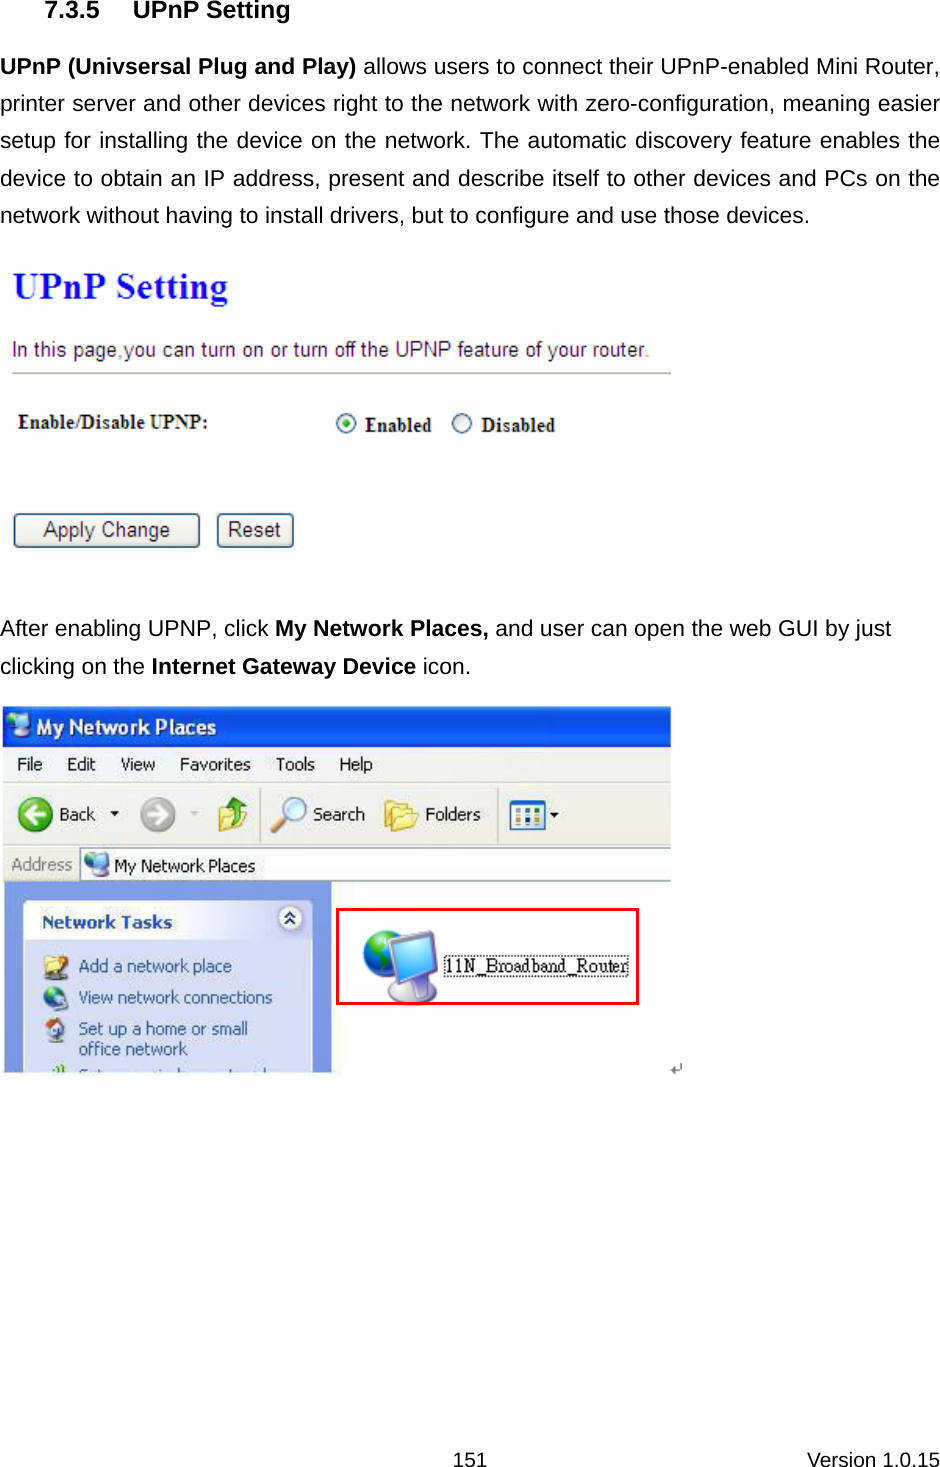 Version 1.0.15 1517.3.5 UPnP Setting UPnP (Univsersal Plug and Play) allows users to connect their UPnP-enabled Mini Router, printer server and other devices right to the network with zero-configuration, meaning easier setup for installing the device on the network. The automatic discovery feature enables the device to obtain an IP address, present and describe itself to other devices and PCs on the network without having to install drivers, but to configure and use those devices.    After enabling UPNP, click My Network Places, and user can open the web GUI by just clicking on the Internet Gateway Device icon.       